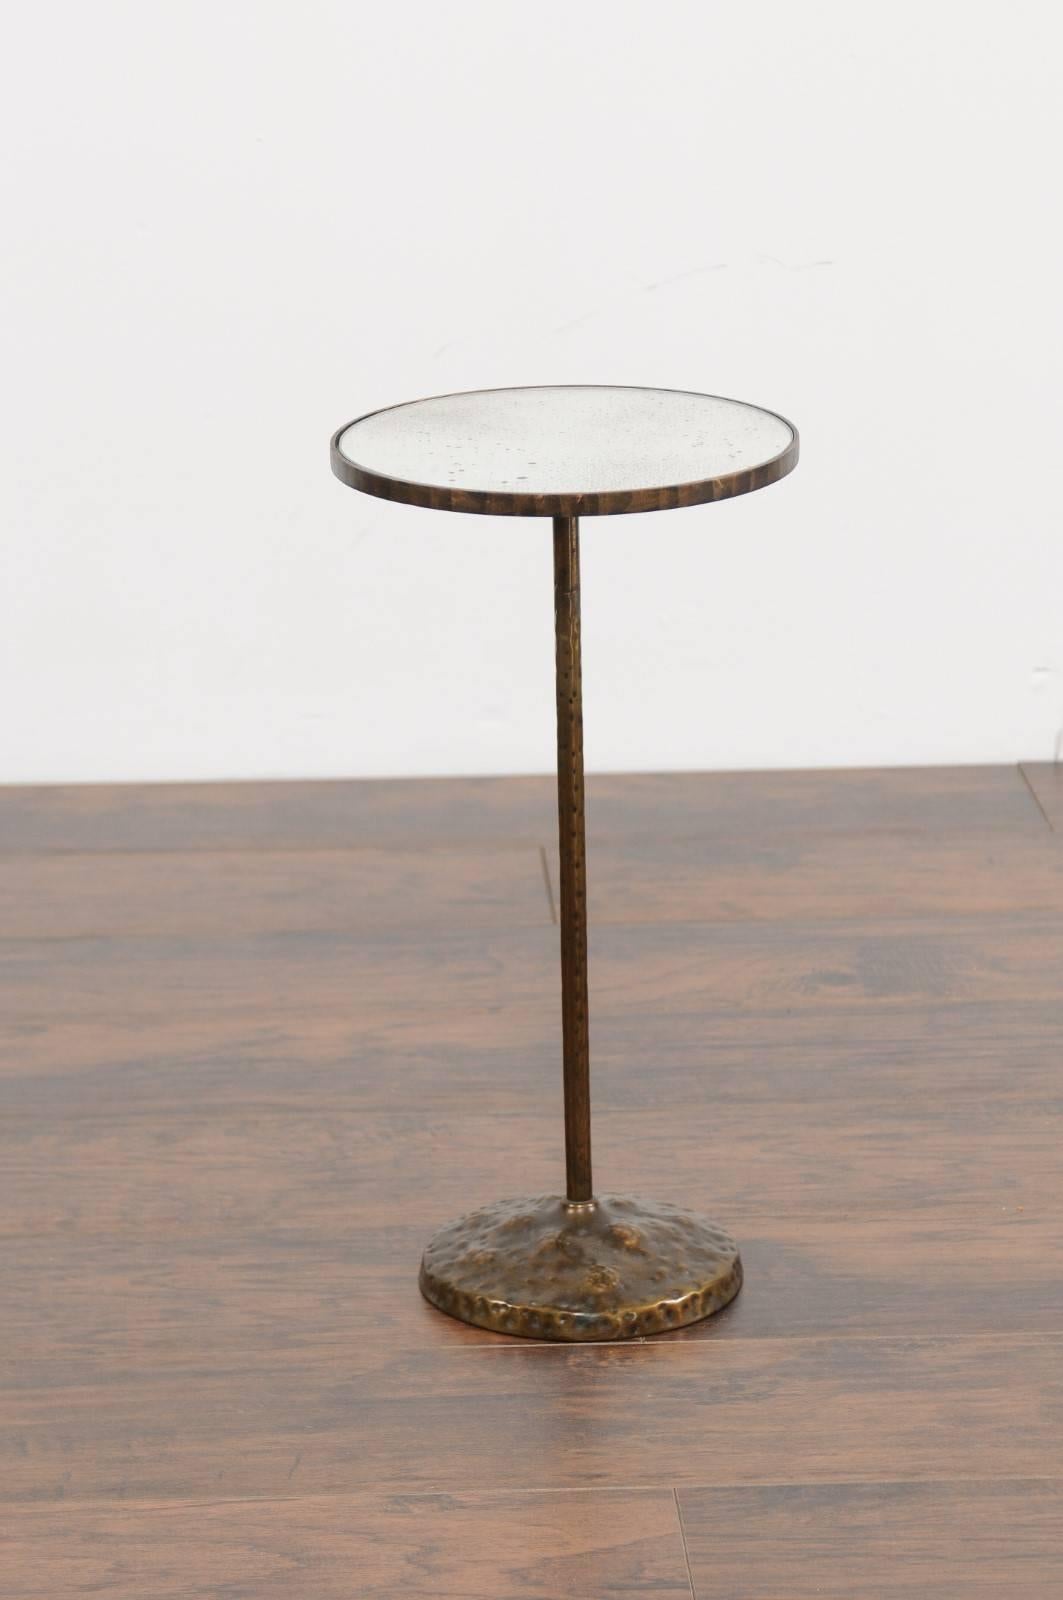 A petite French round copper pedestal drink table from the first half of the 20th century and new mirrored top. This French copper drink table features a circular top, adorned with a new custom-made mirror. The table is raised on a thin pedestal